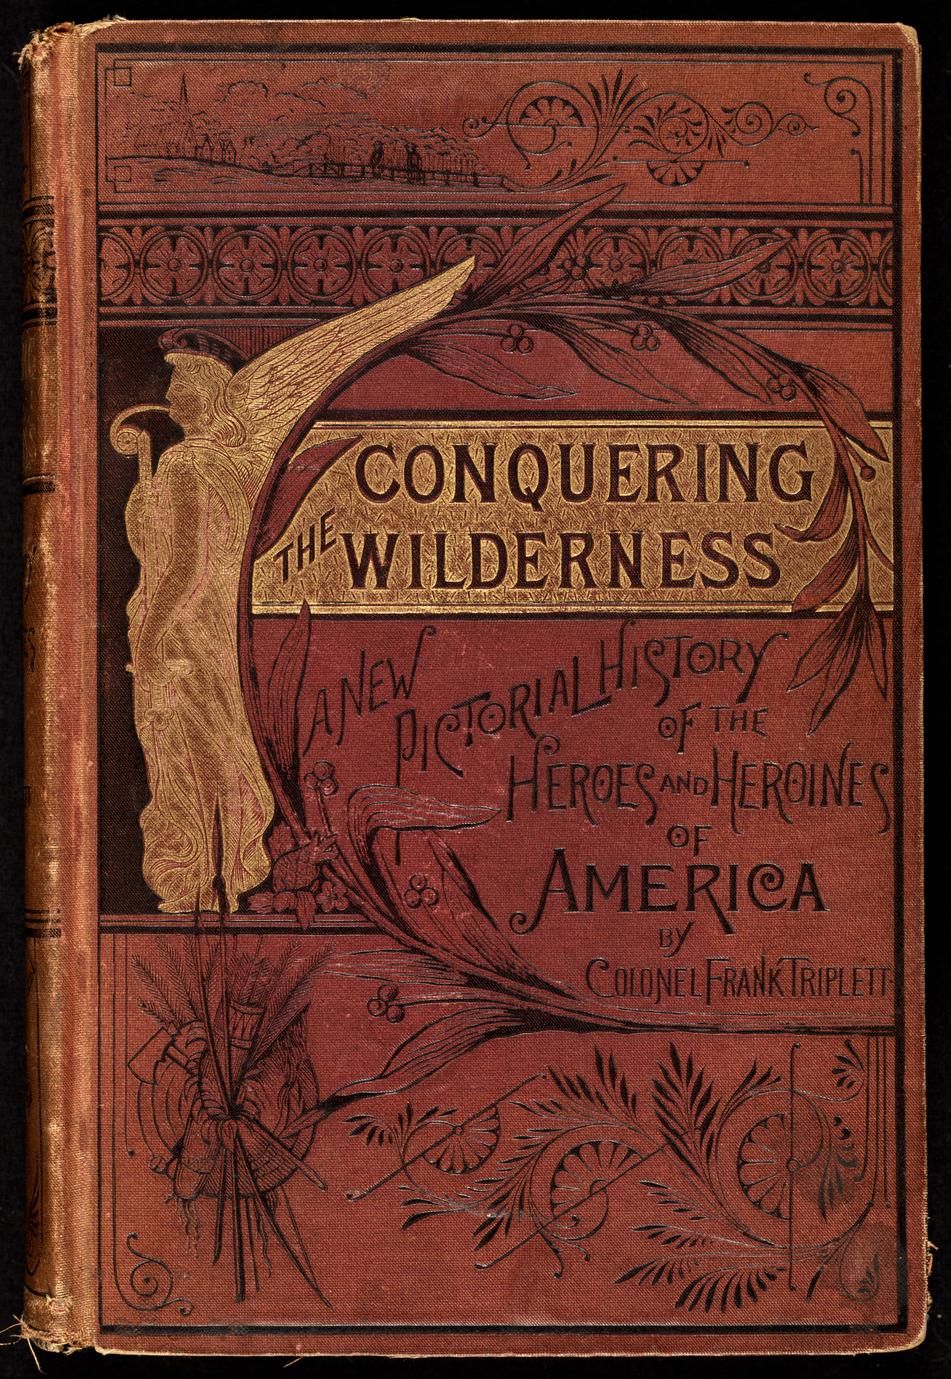 Conquering the wilderness ; or, New pictorial history of the life and times of the pioneer heroes and heroines of America (1 of 2)